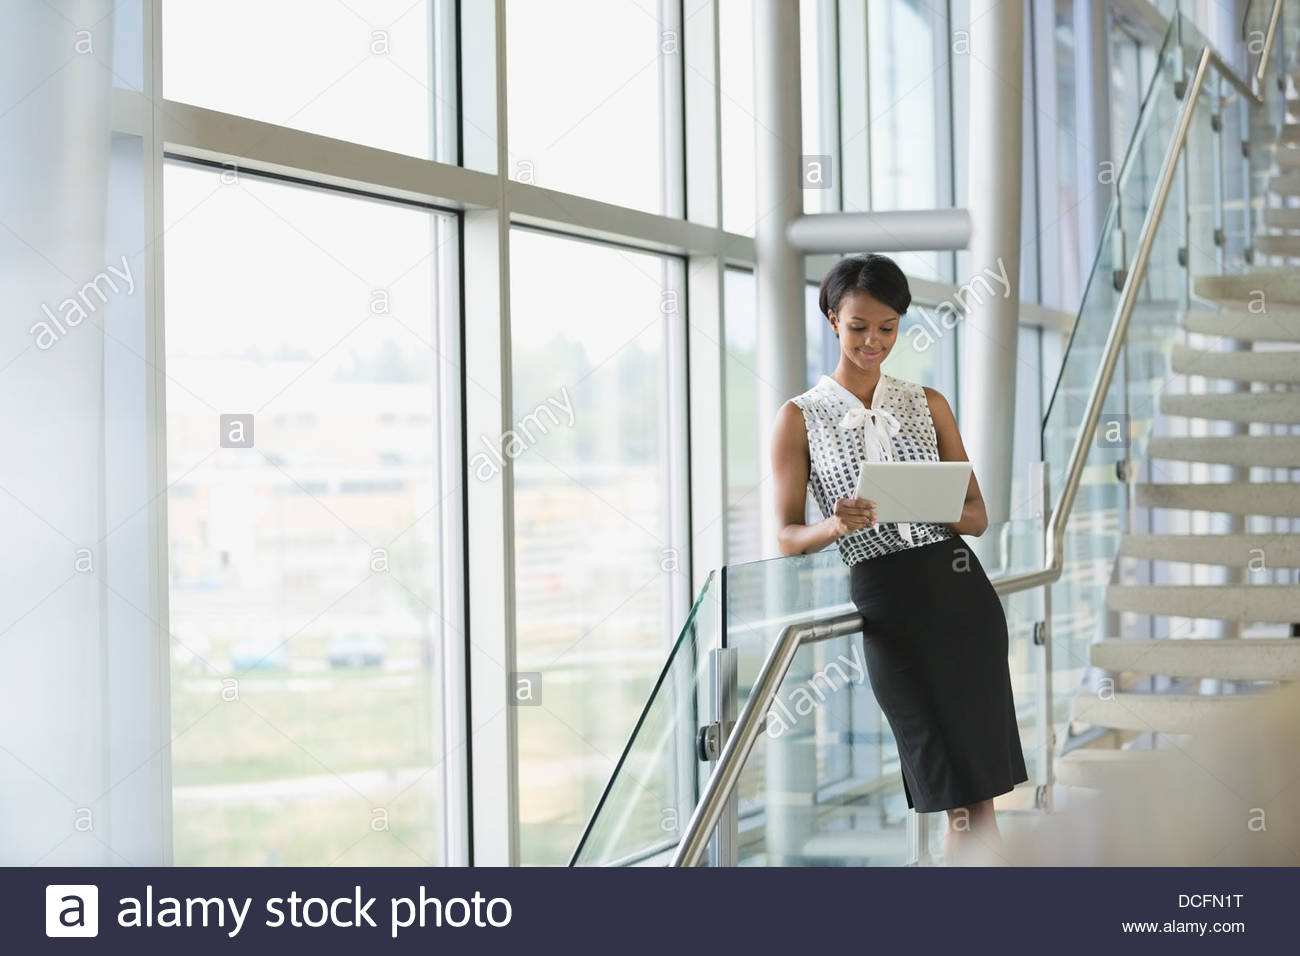 Businesswoman using digital tablet on staircase Banque D'Images